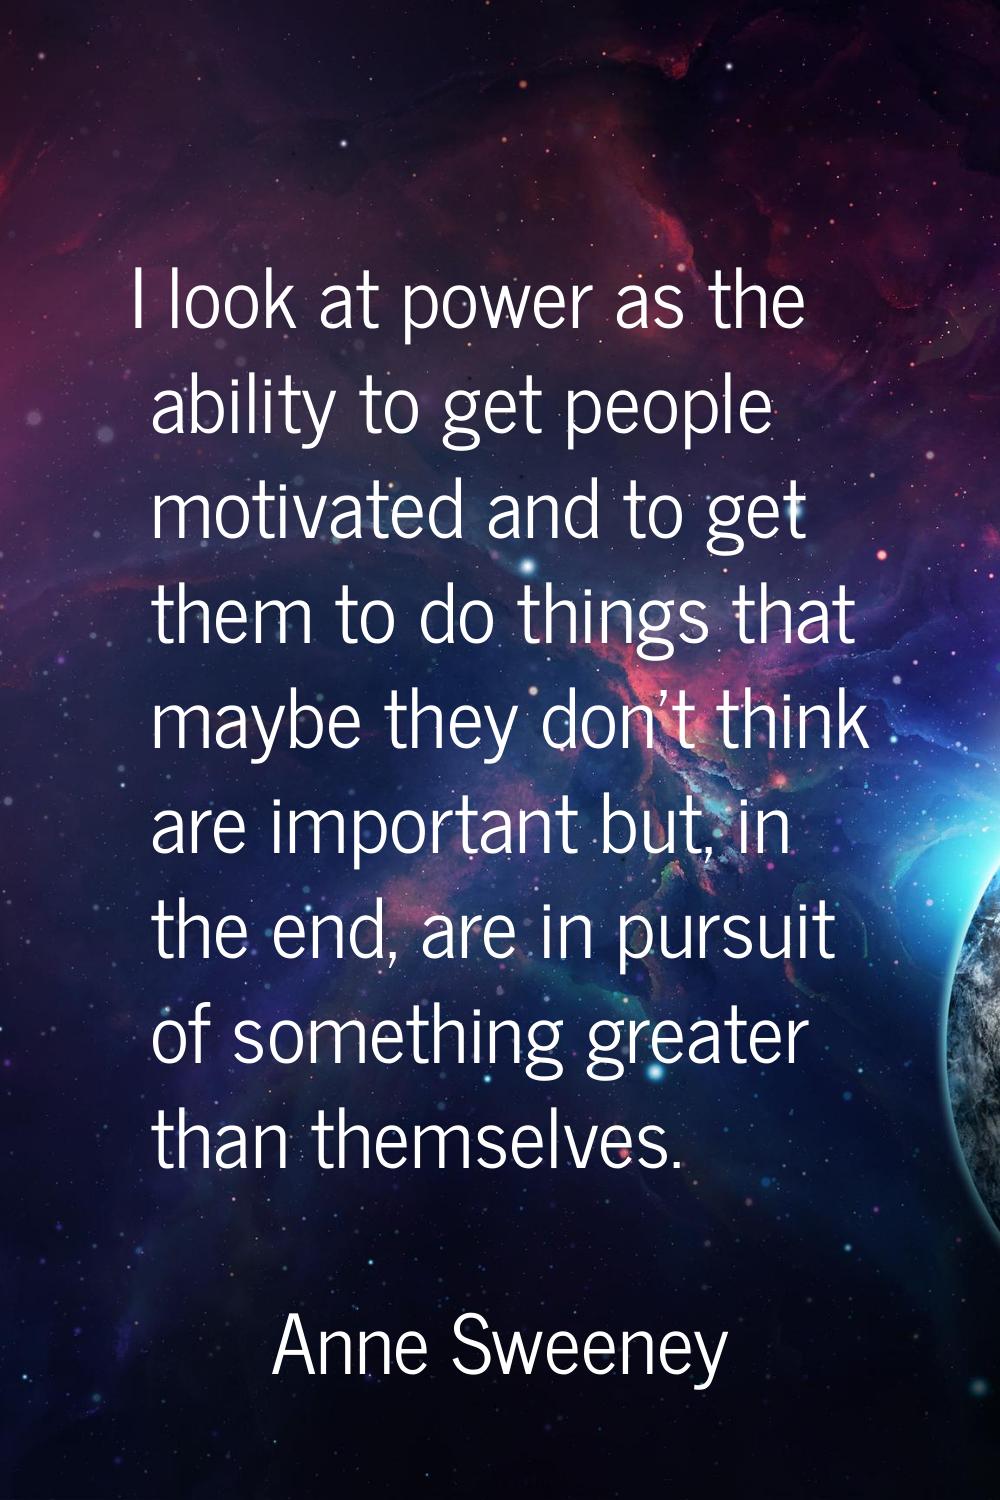 I look at power as the ability to get people motivated and to get them to do things that maybe they